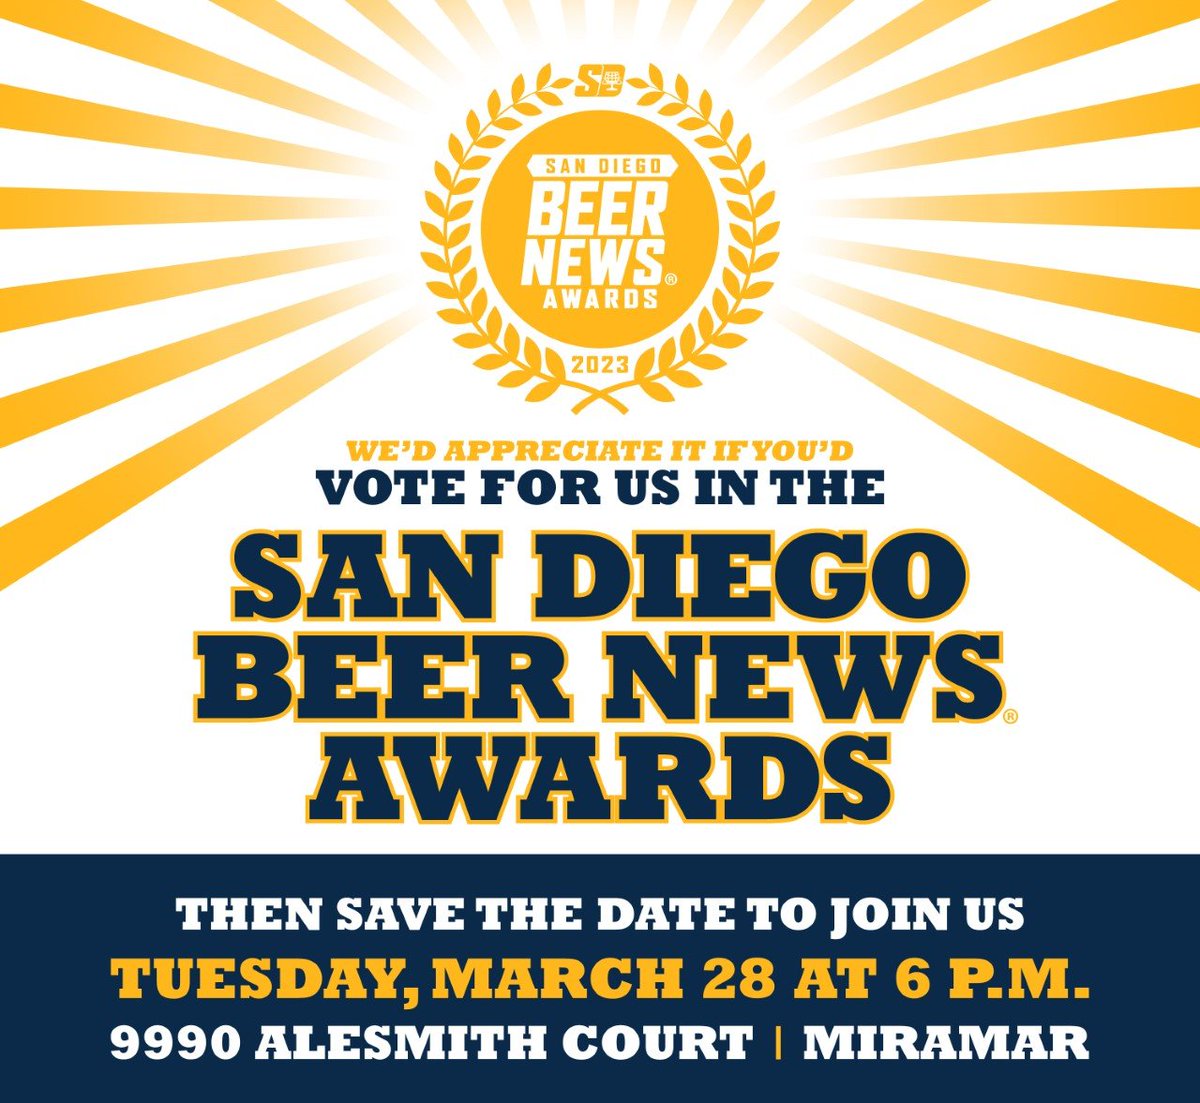 VOTE for KARL in the @SDBeerNews  awards! Click the link and be sure to show us some love (voting closes on the 28th!) 

bit.ly/SDBNA23BALLOT